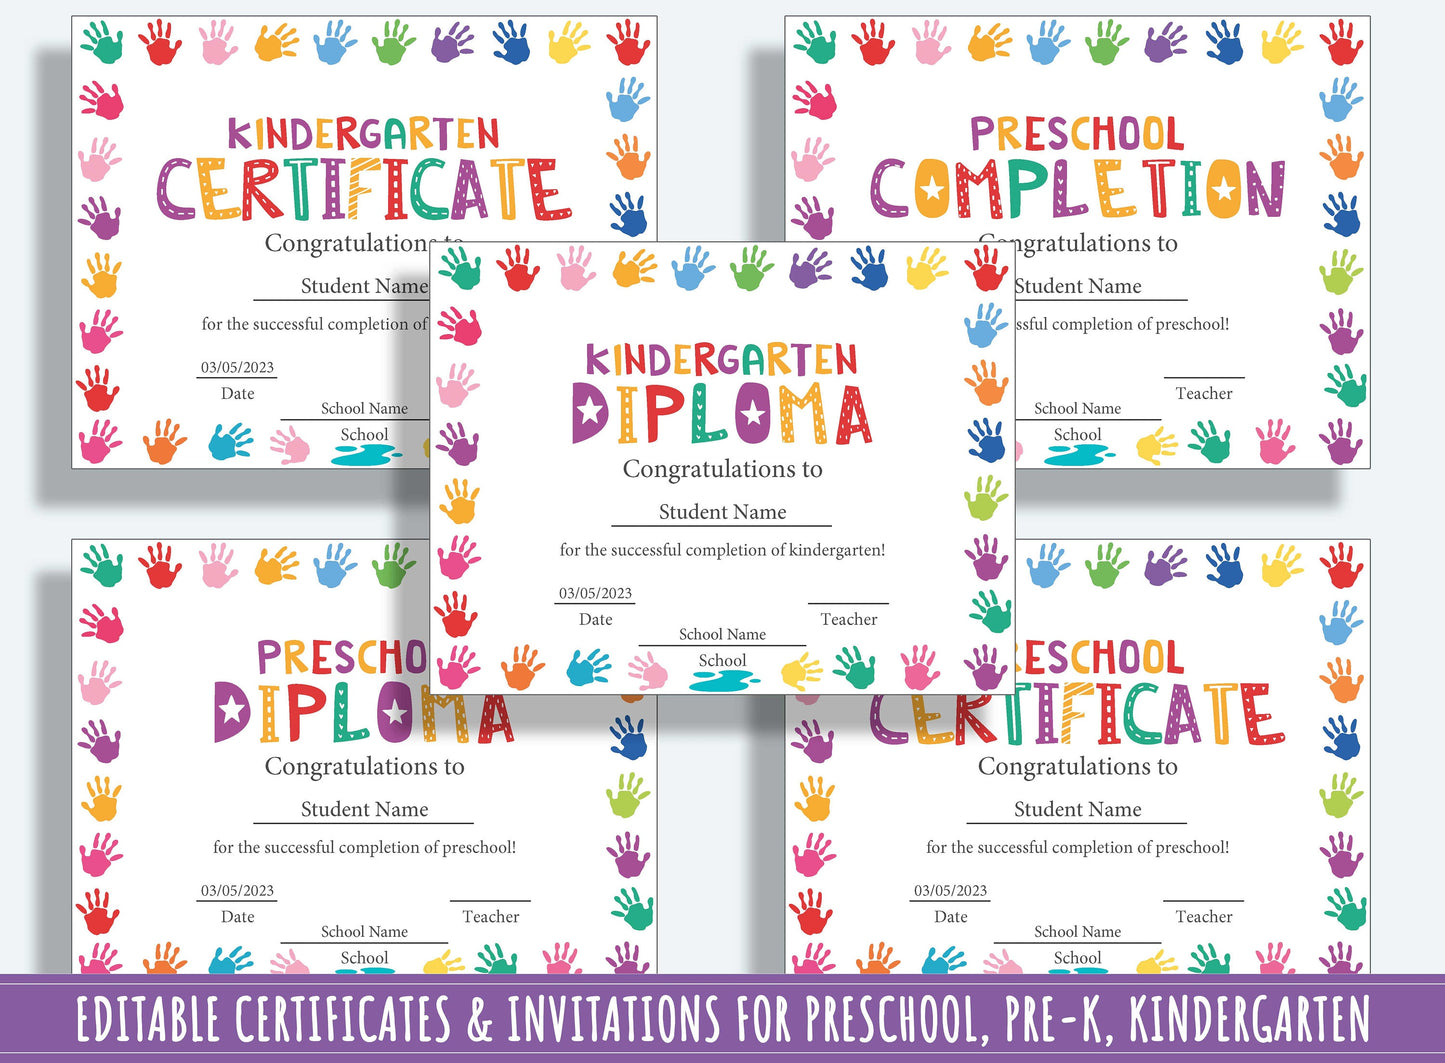 37 Editable Pages of Completions, Diplomas, Certificates, and Invitations for PreK and Kindergarten, PDF File, Instant Download